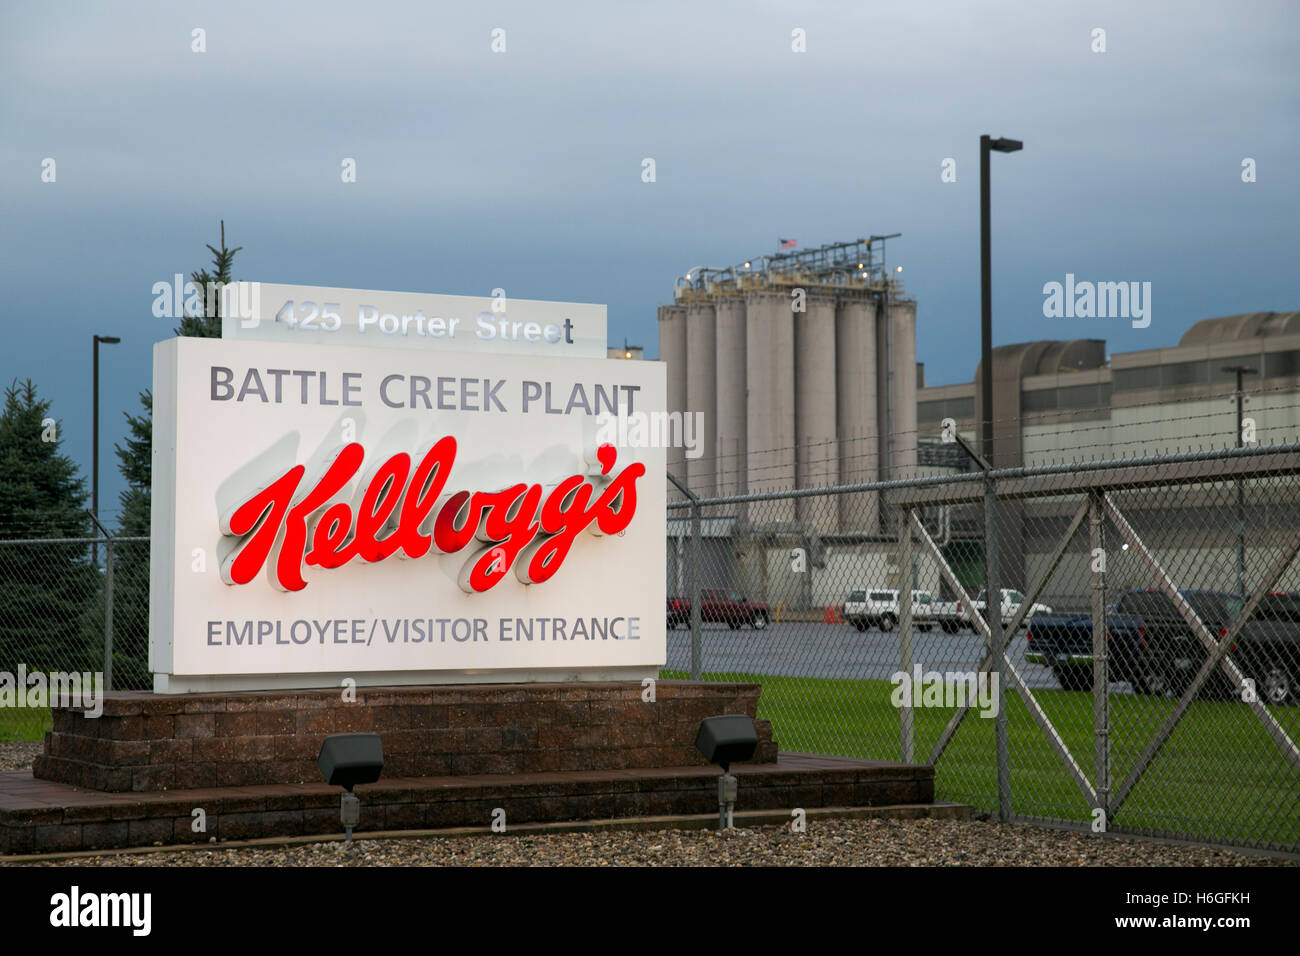 A logo sign outside of the Kellogg's Battle Creek Plant in Battle Creek, Michigan on October 16, 2016. Stock Photo